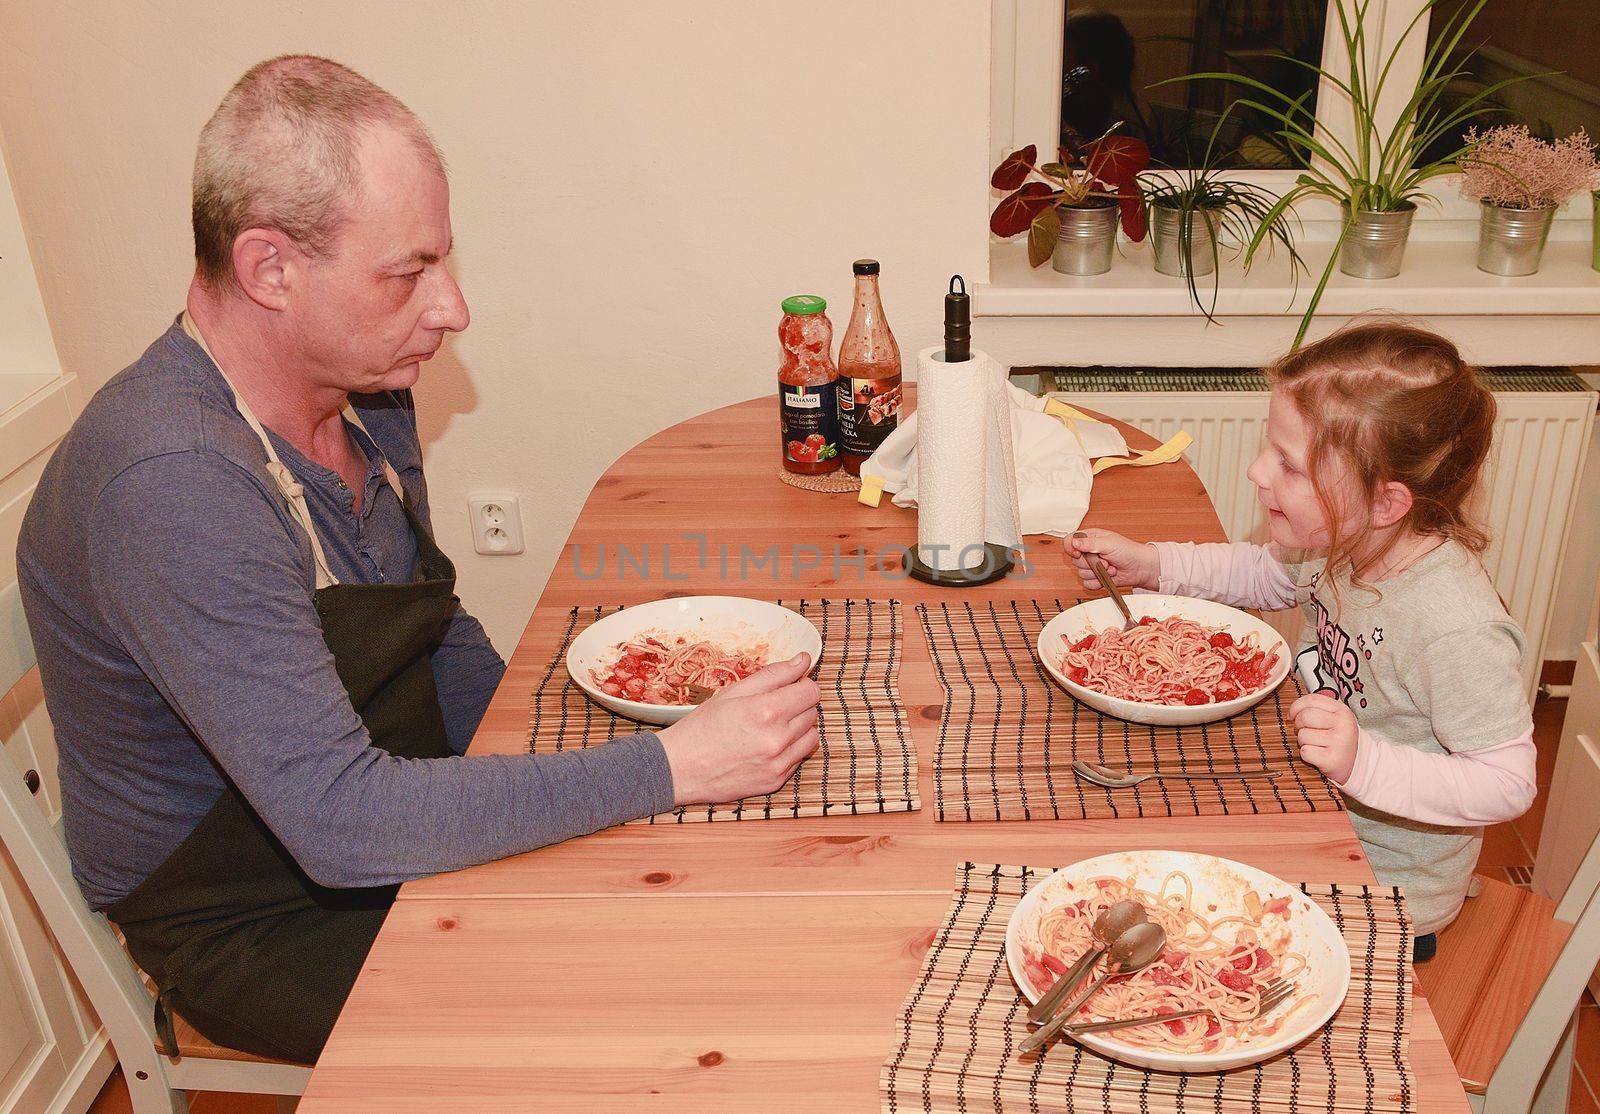 Daughter and father in the kitchen eating spaghetti for dinner.